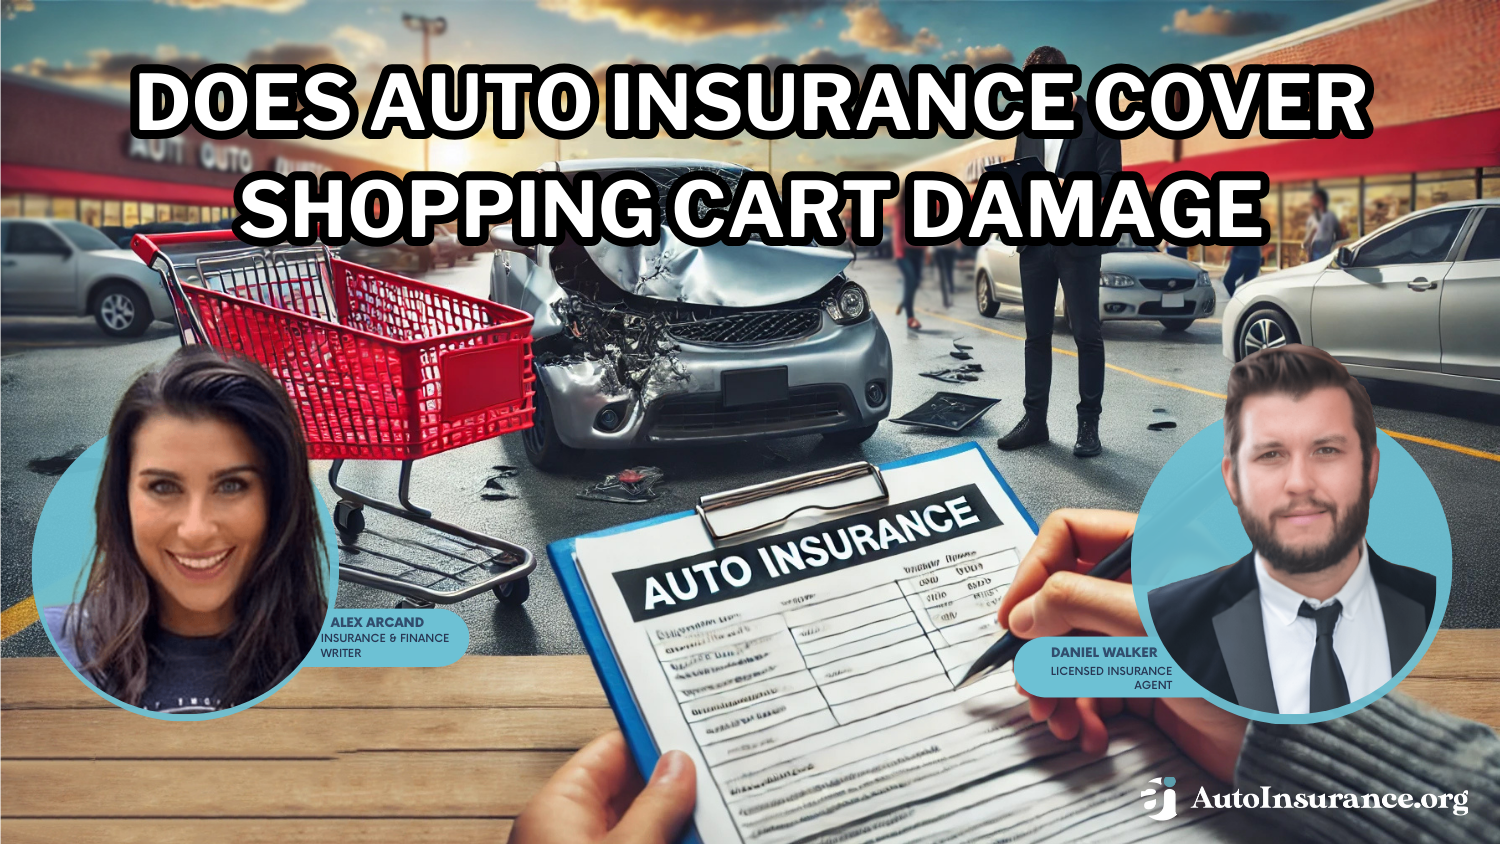 Does auto insurance cover shopping cart damage?